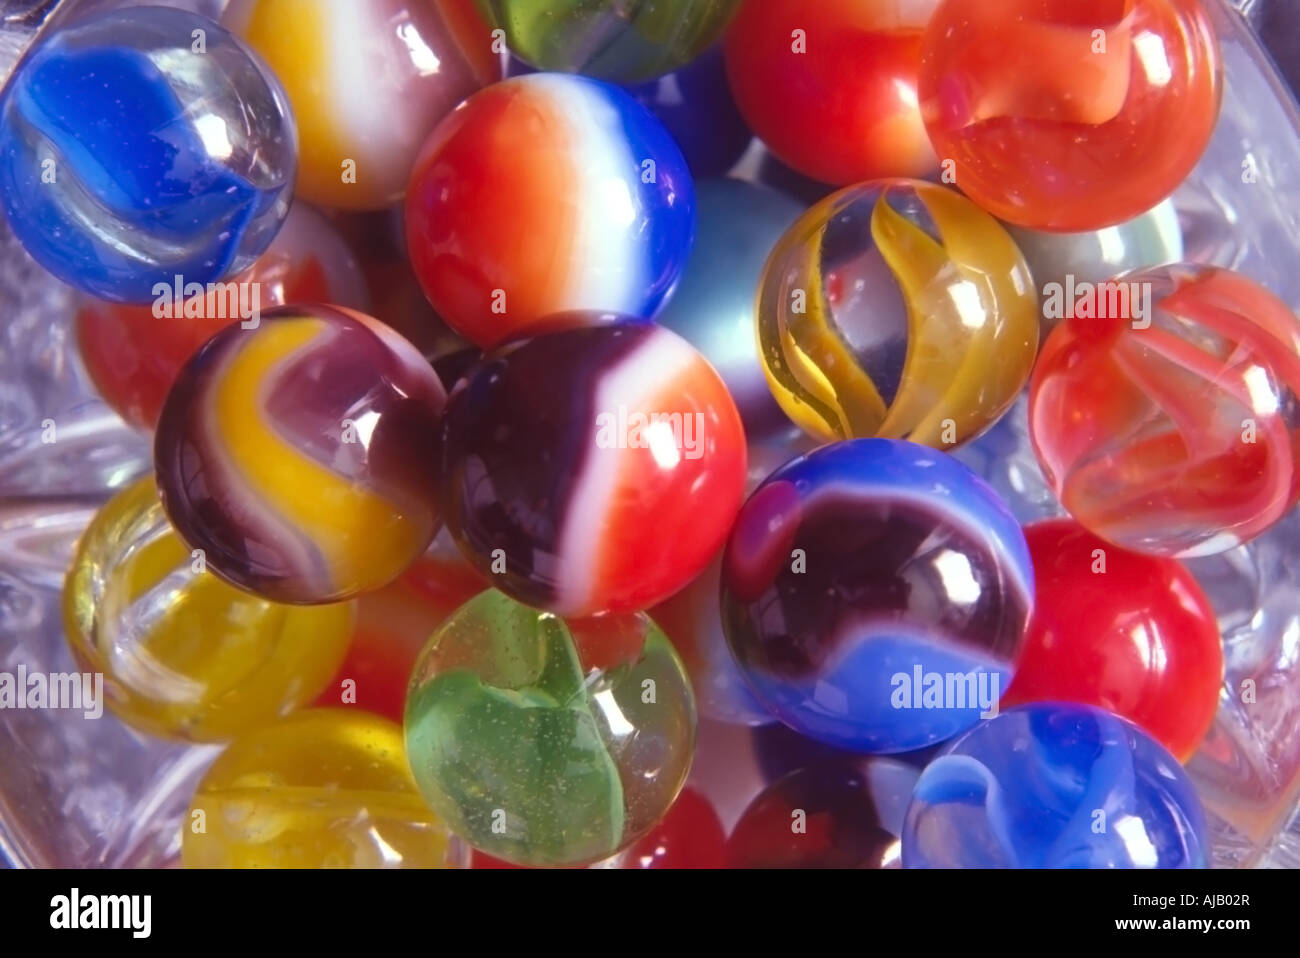 A colorful still life background of nostalgic marbles that are much like the ones I remember as I was growing up. Stock Photo